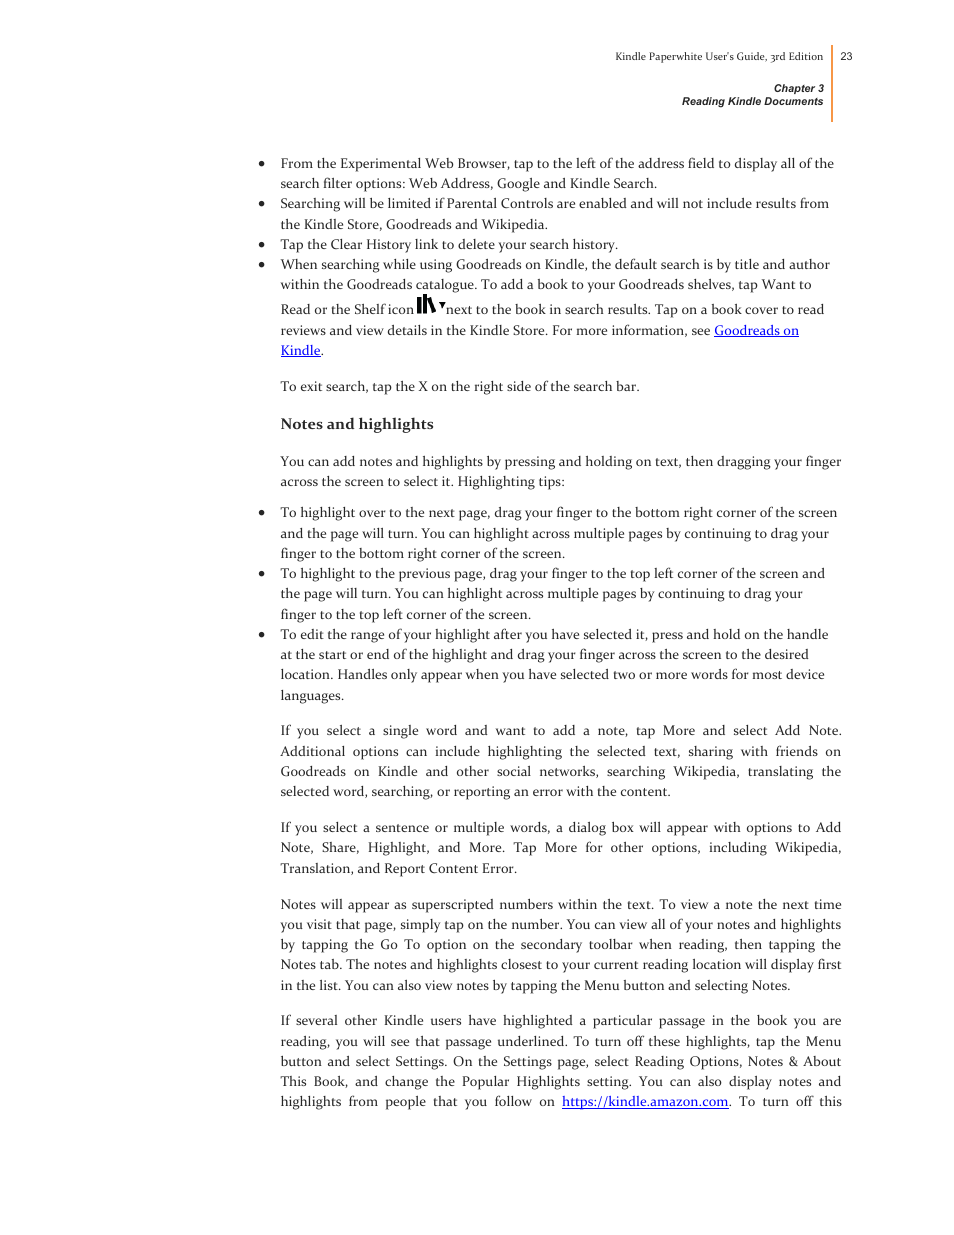 Notes and highlights | Kindle Paperwhite (2nd Generation) User Manual | Page 23 / 47